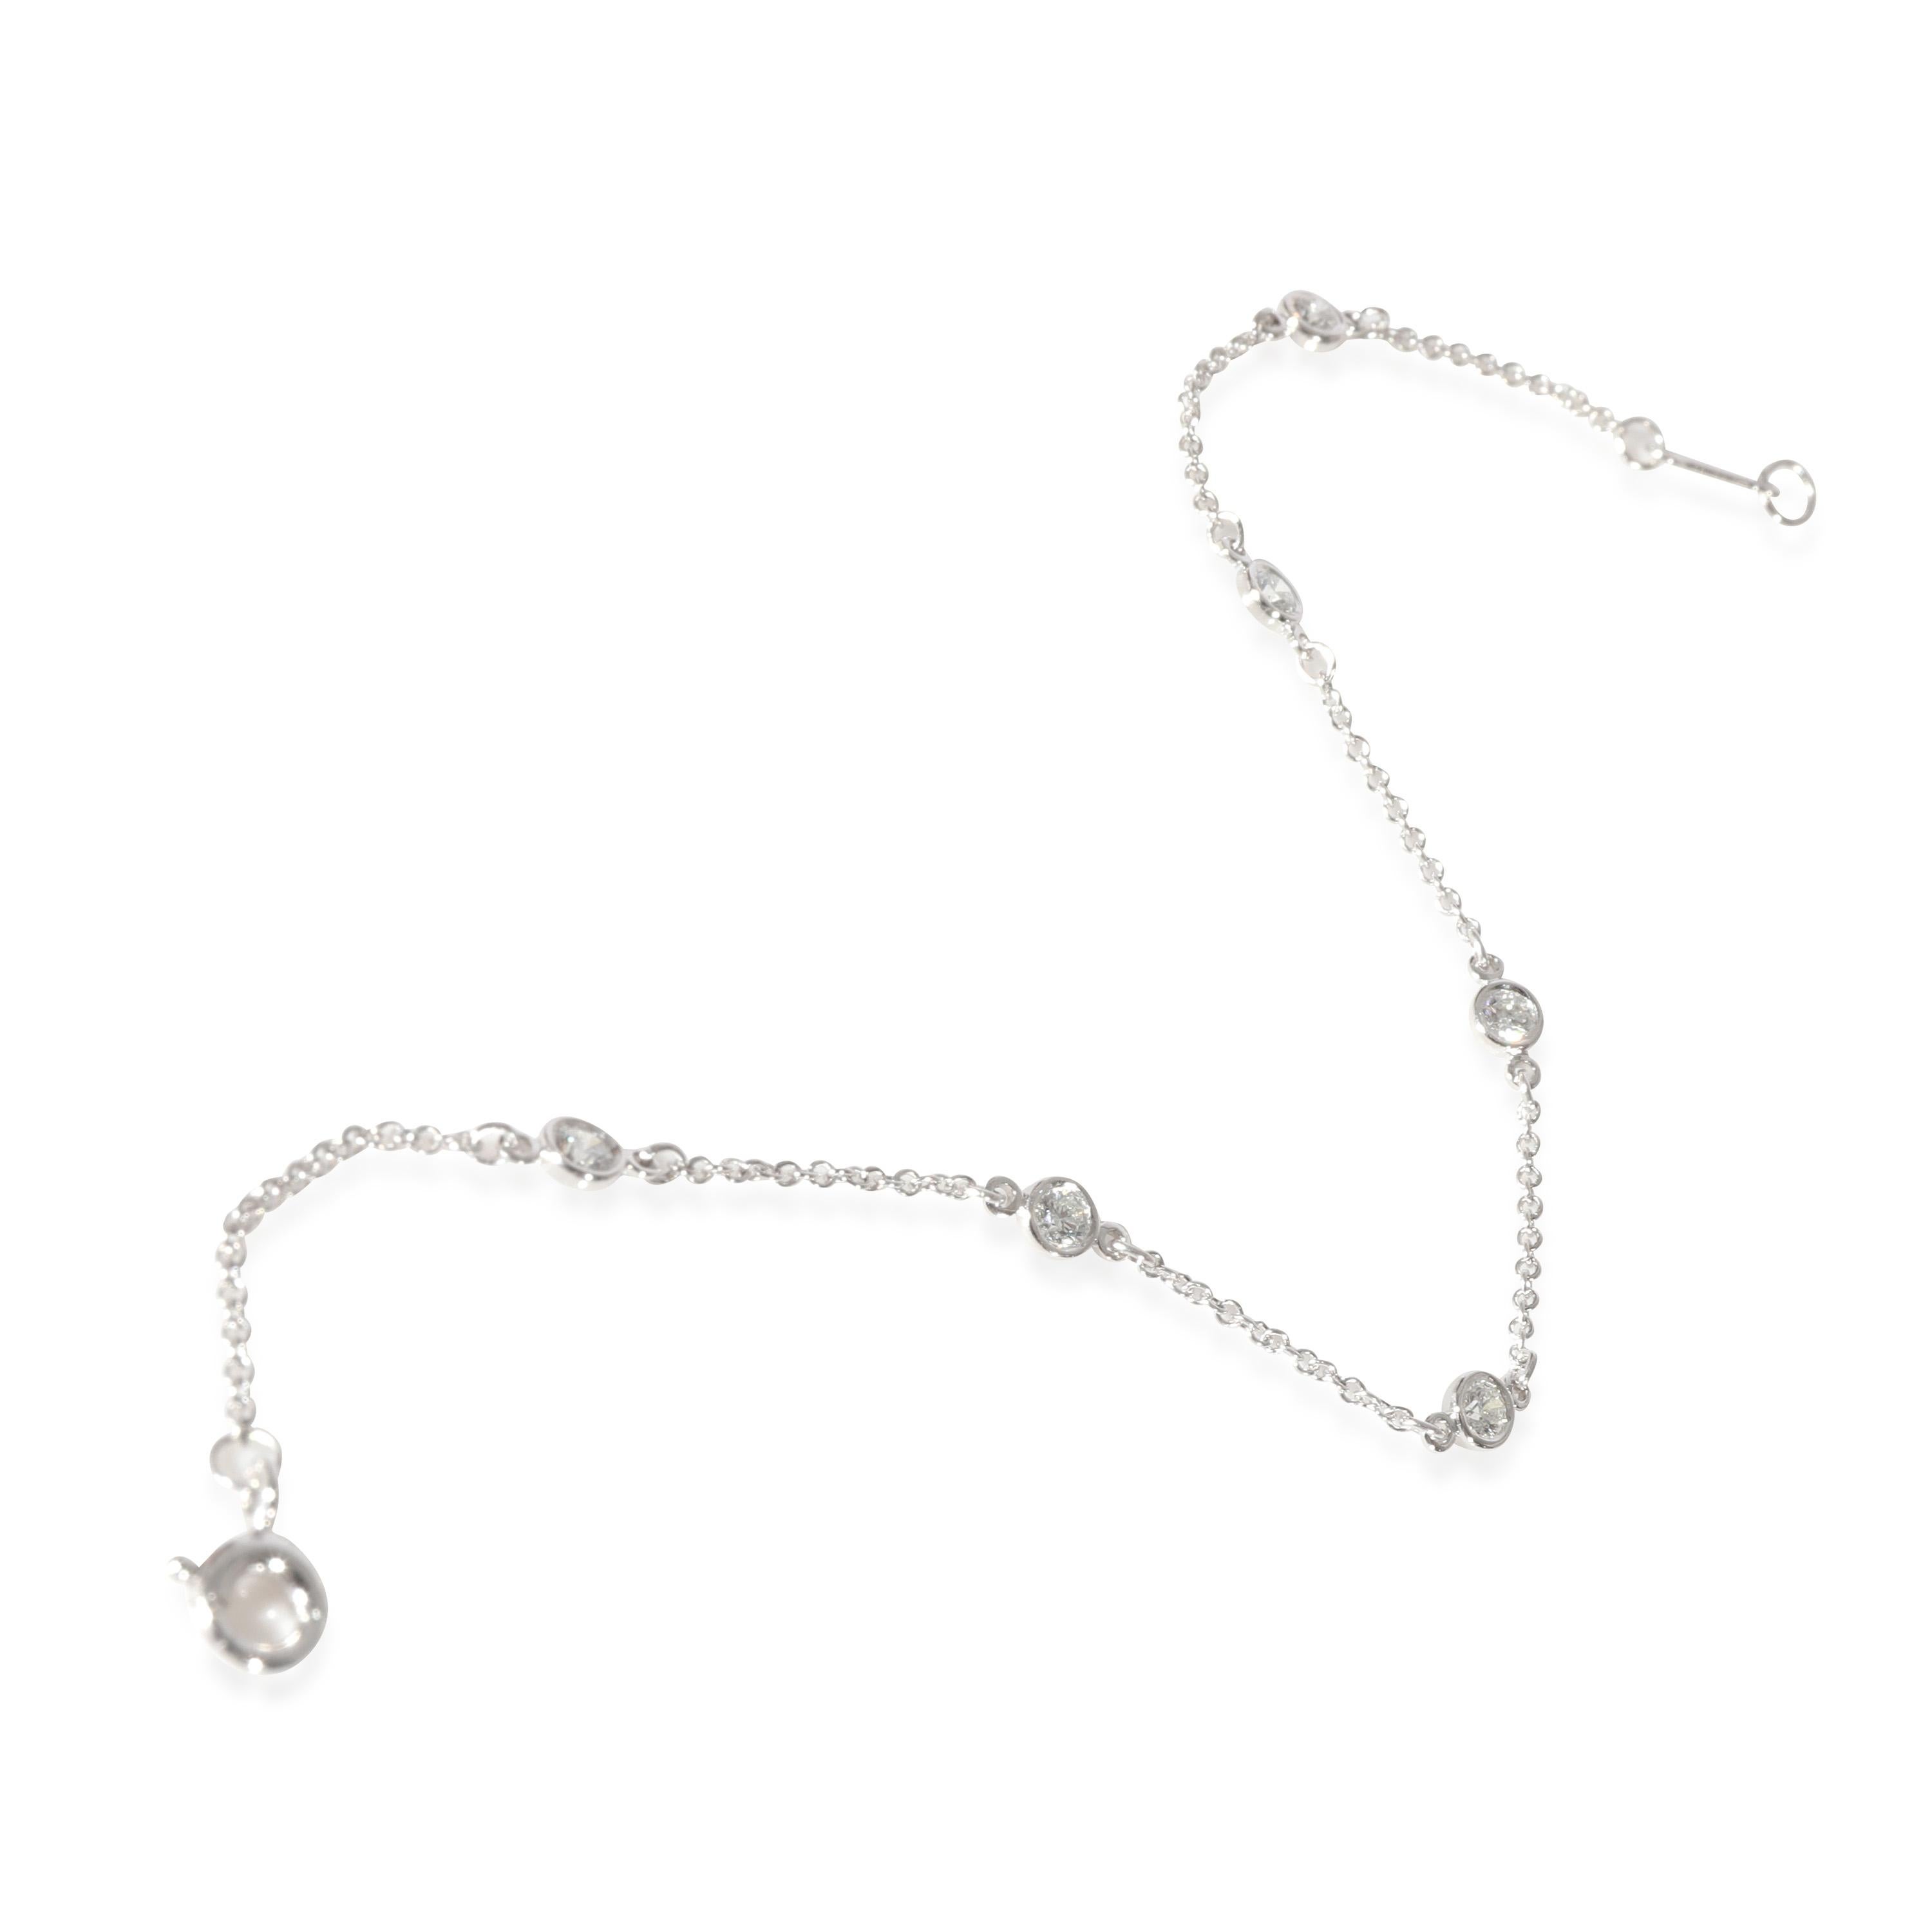 Tiffany & Co. Elsa Peretti Diamonds By the Yard Bracelet in Platinum 0.3 CTW

PRIMARY DETAILS
SKU: 125117
Listing Title: Tiffany & Co. Elsa Peretti Diamonds By the Yard Bracelet in Platinum 0.3 CTW
Condition Description: Retails for 3075 USD. In